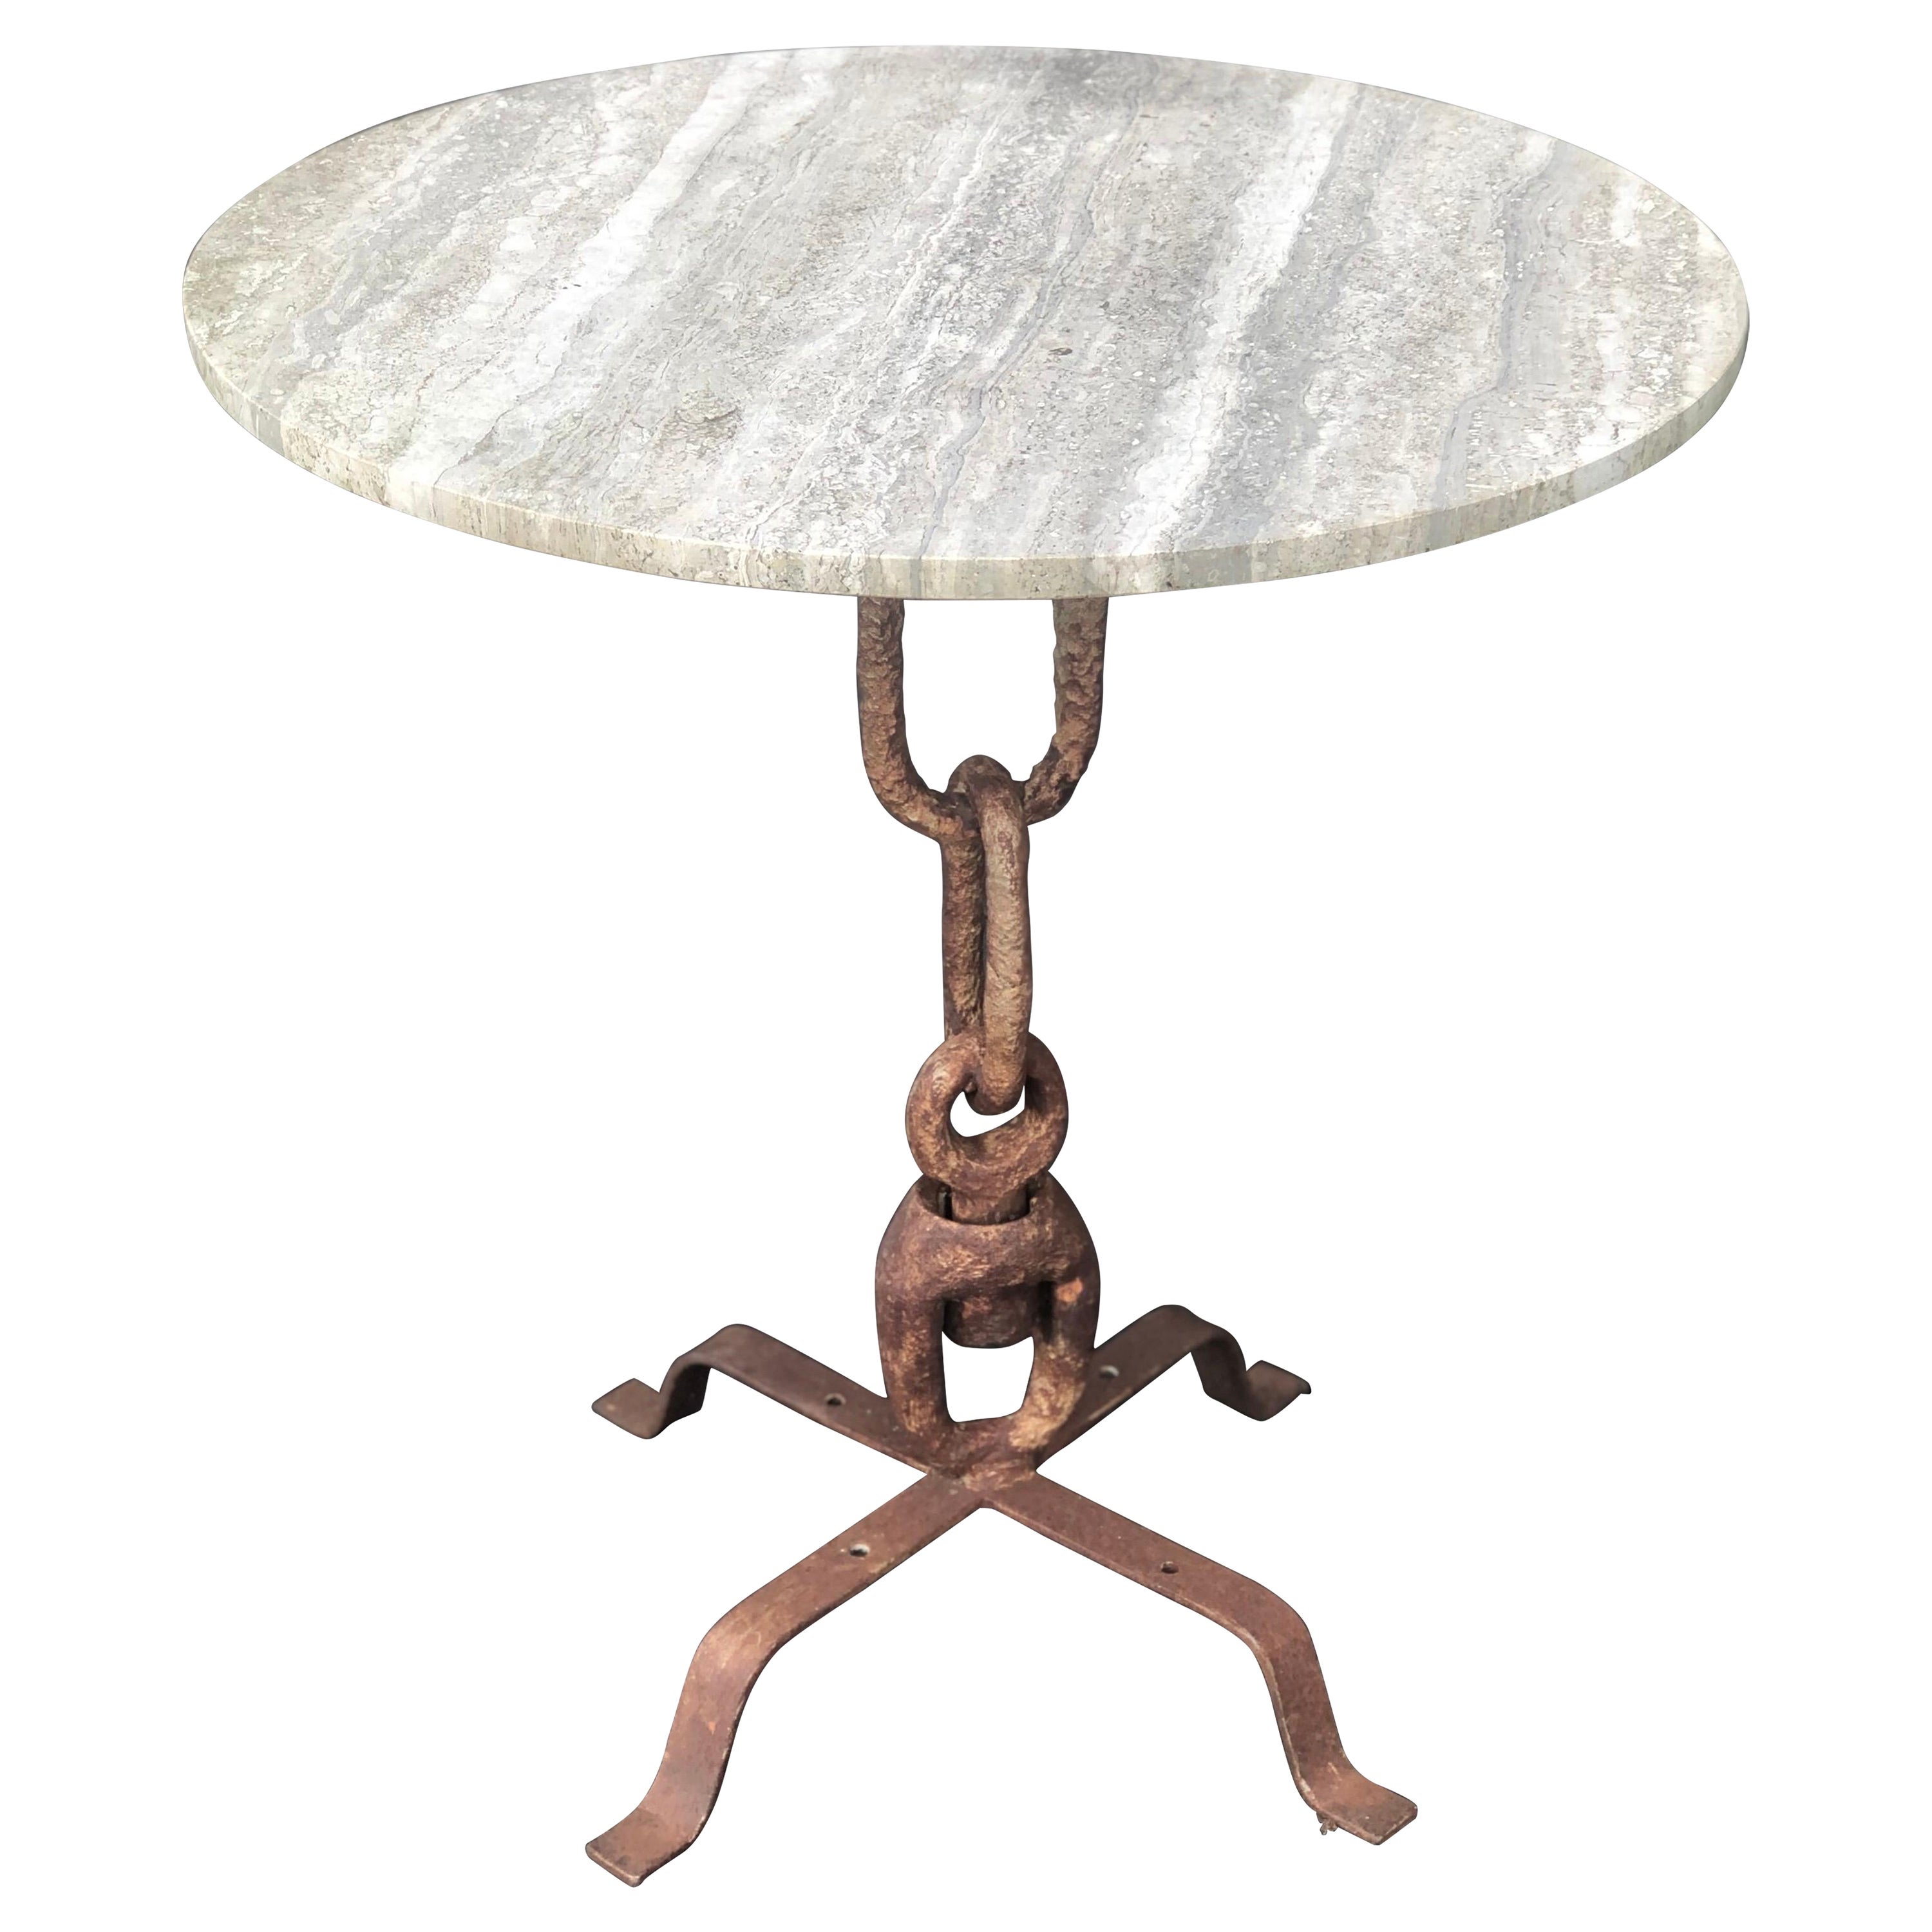 French Mid-Century Wrought Iron & Travertine Dining /Side or Garden Table, 1940 For Sale